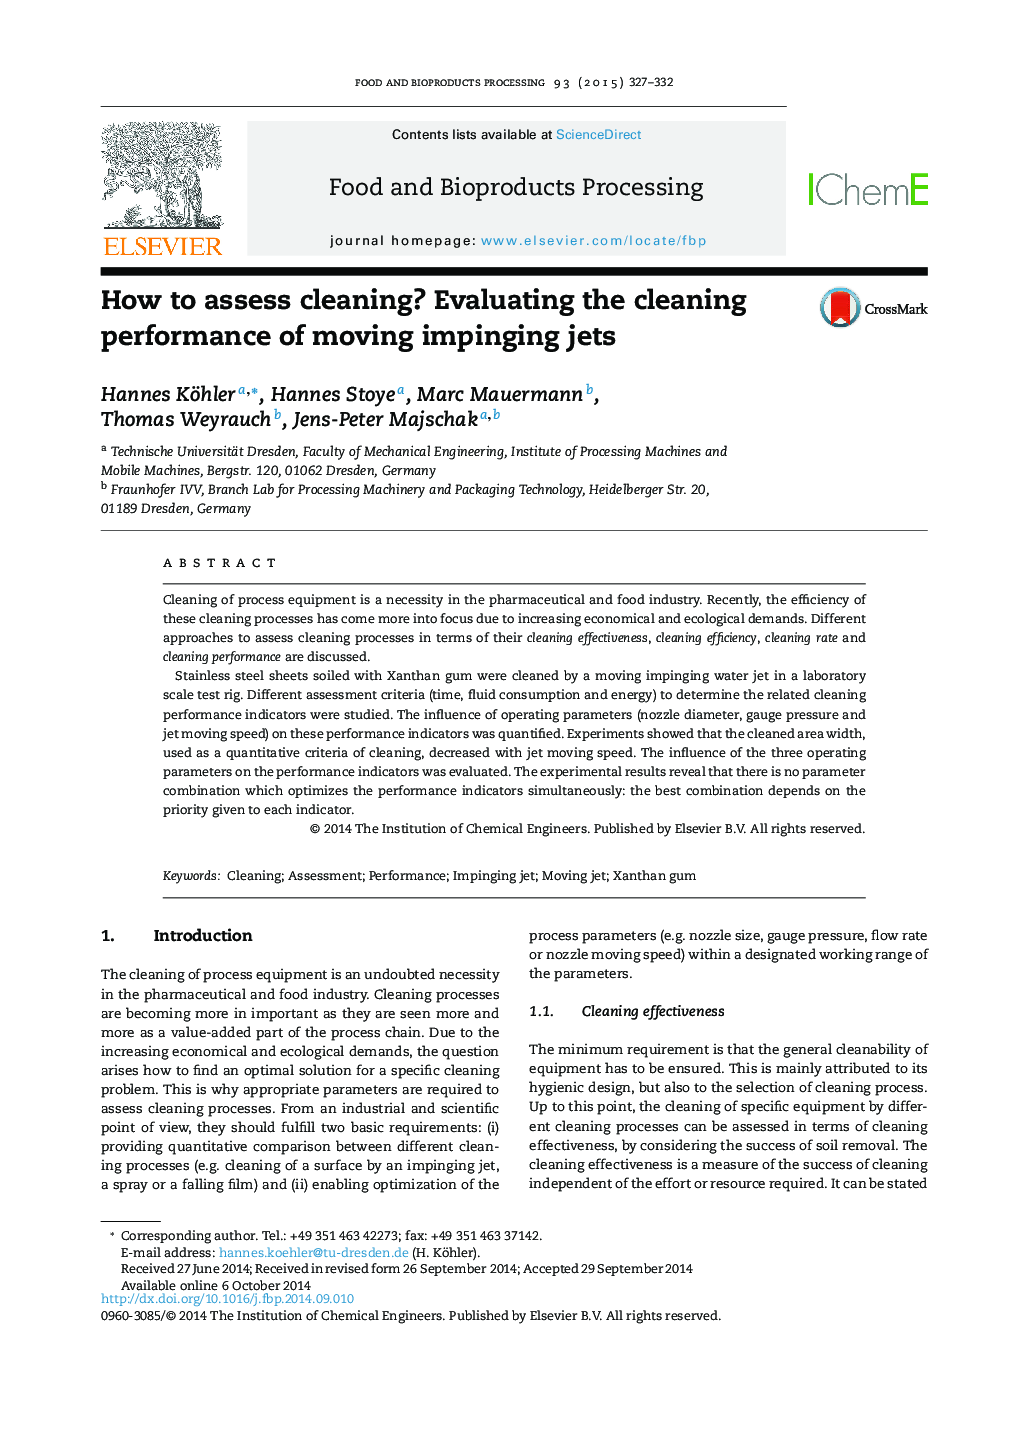 How to assess cleaning? Evaluating the cleaning performance of moving impinging jets